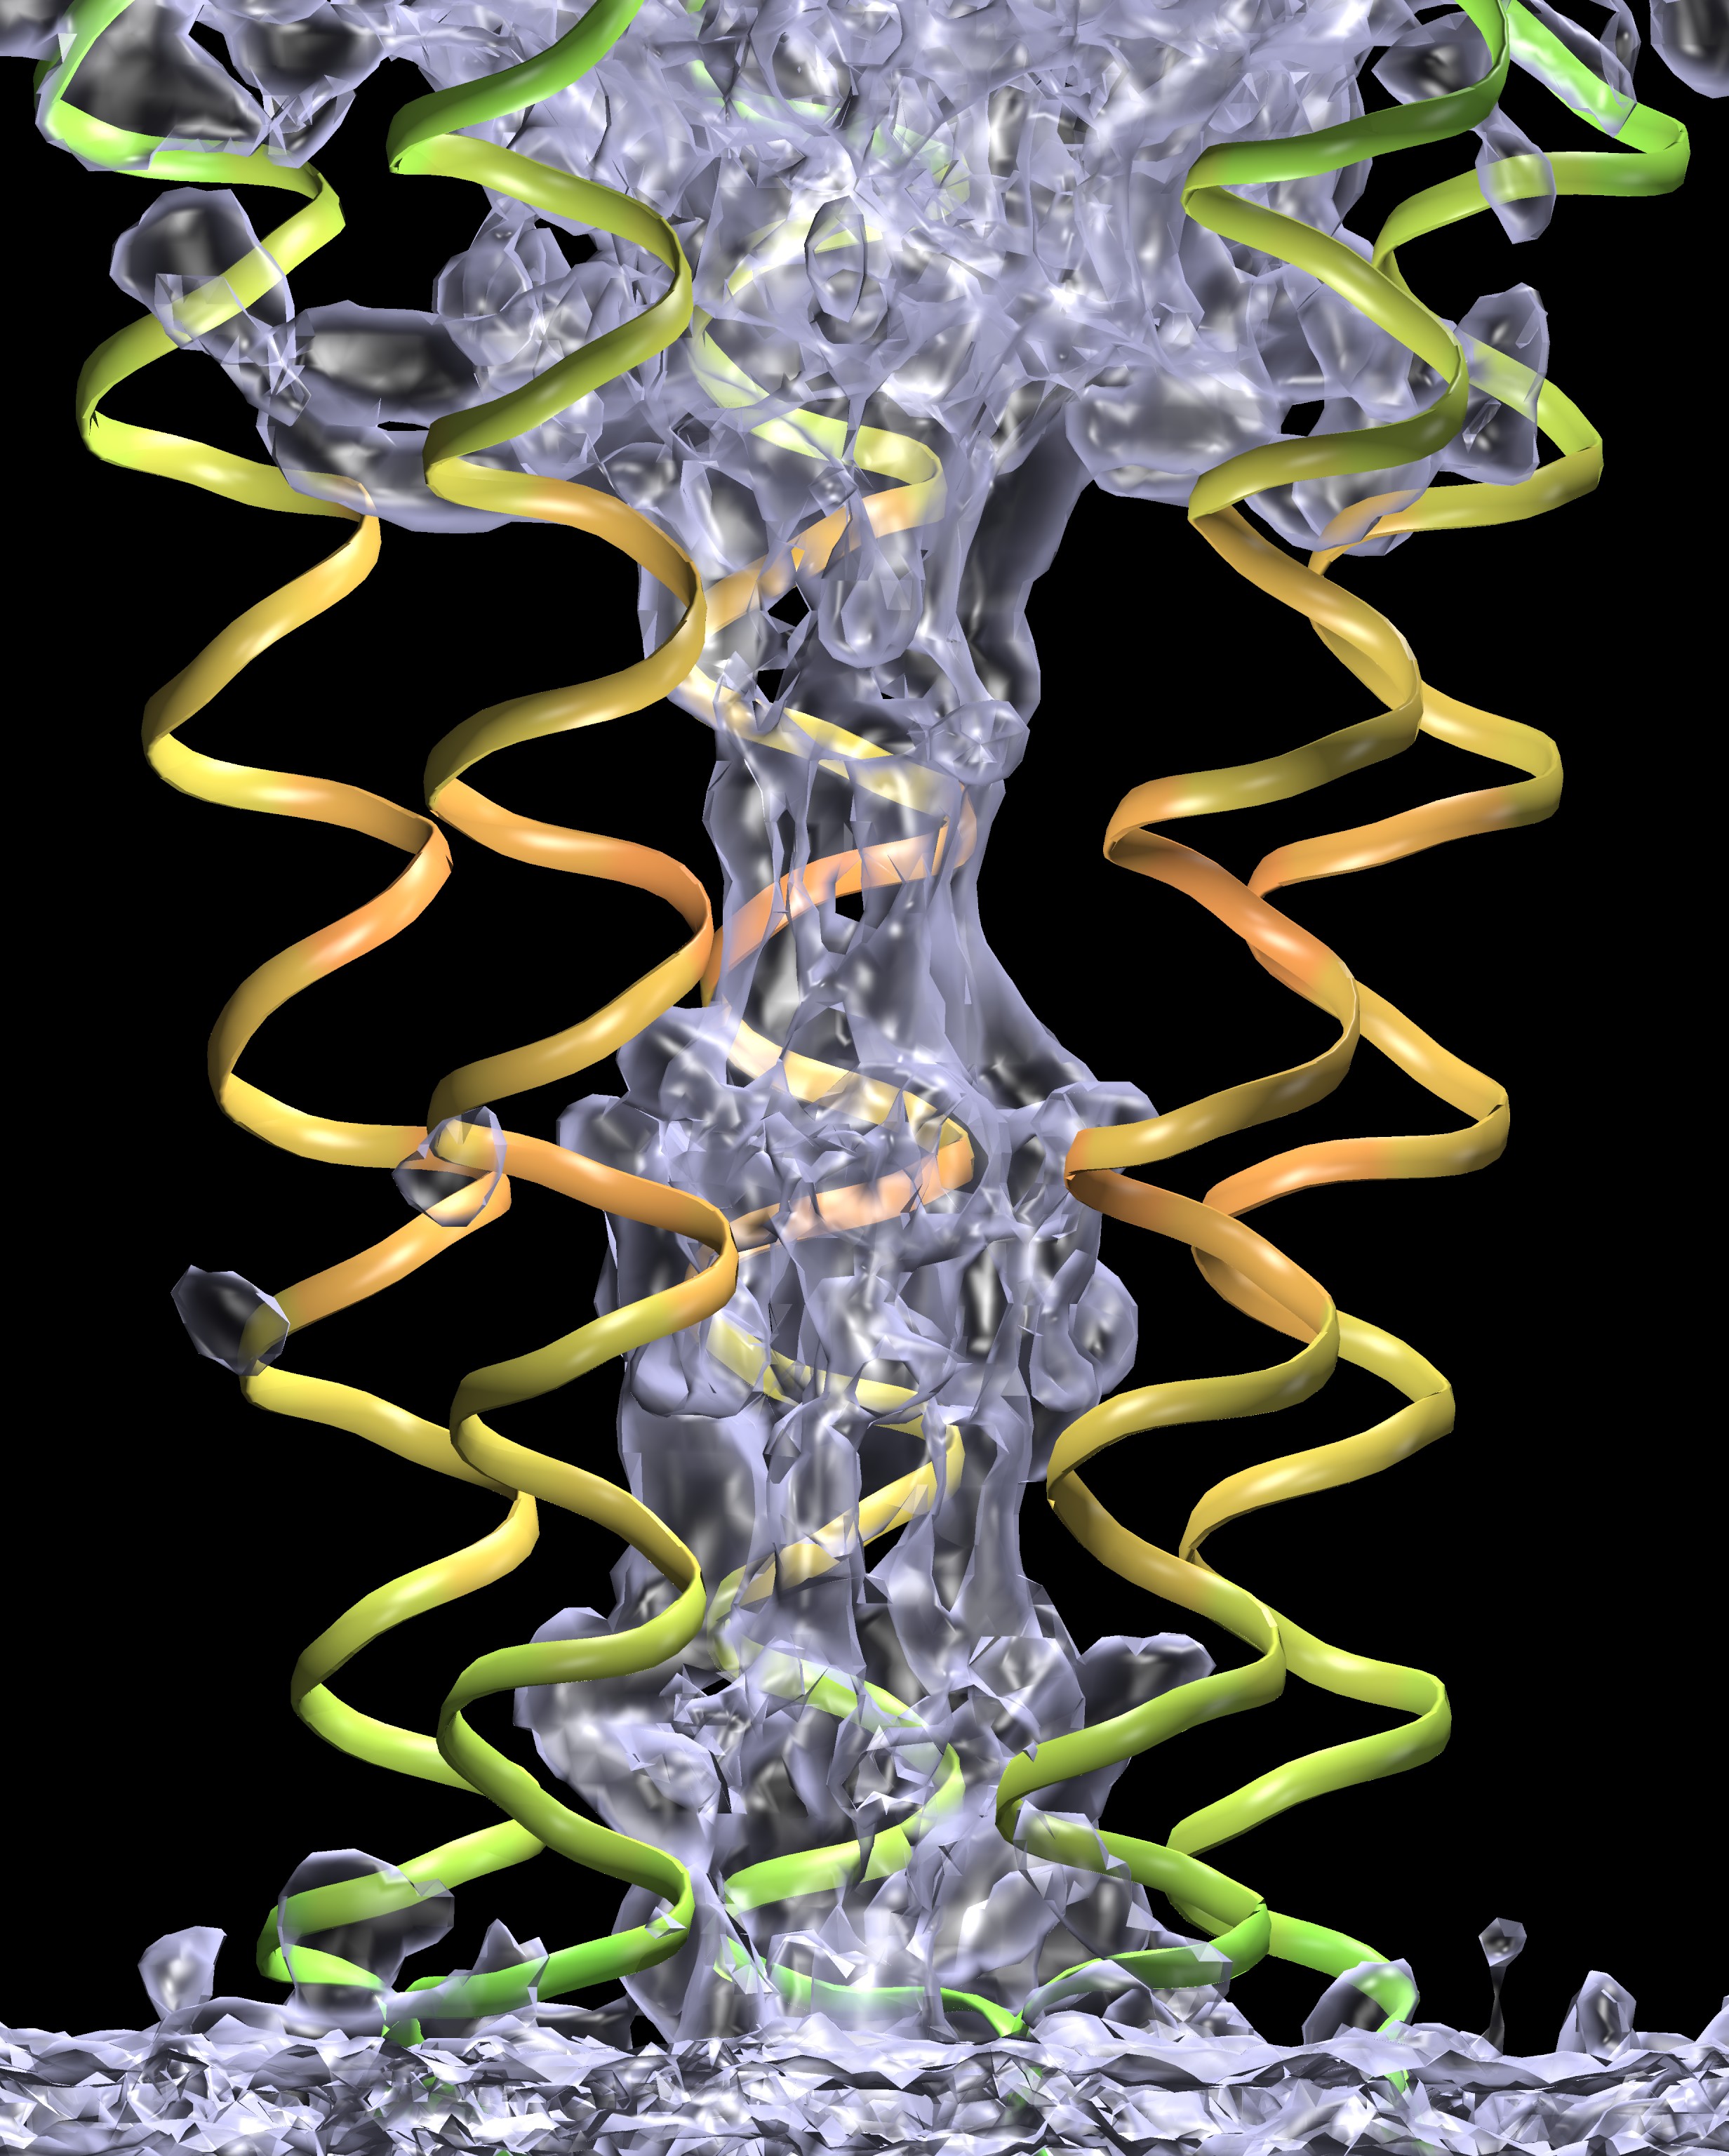 Solvated transmembrane pore of the nAChR ion channel.